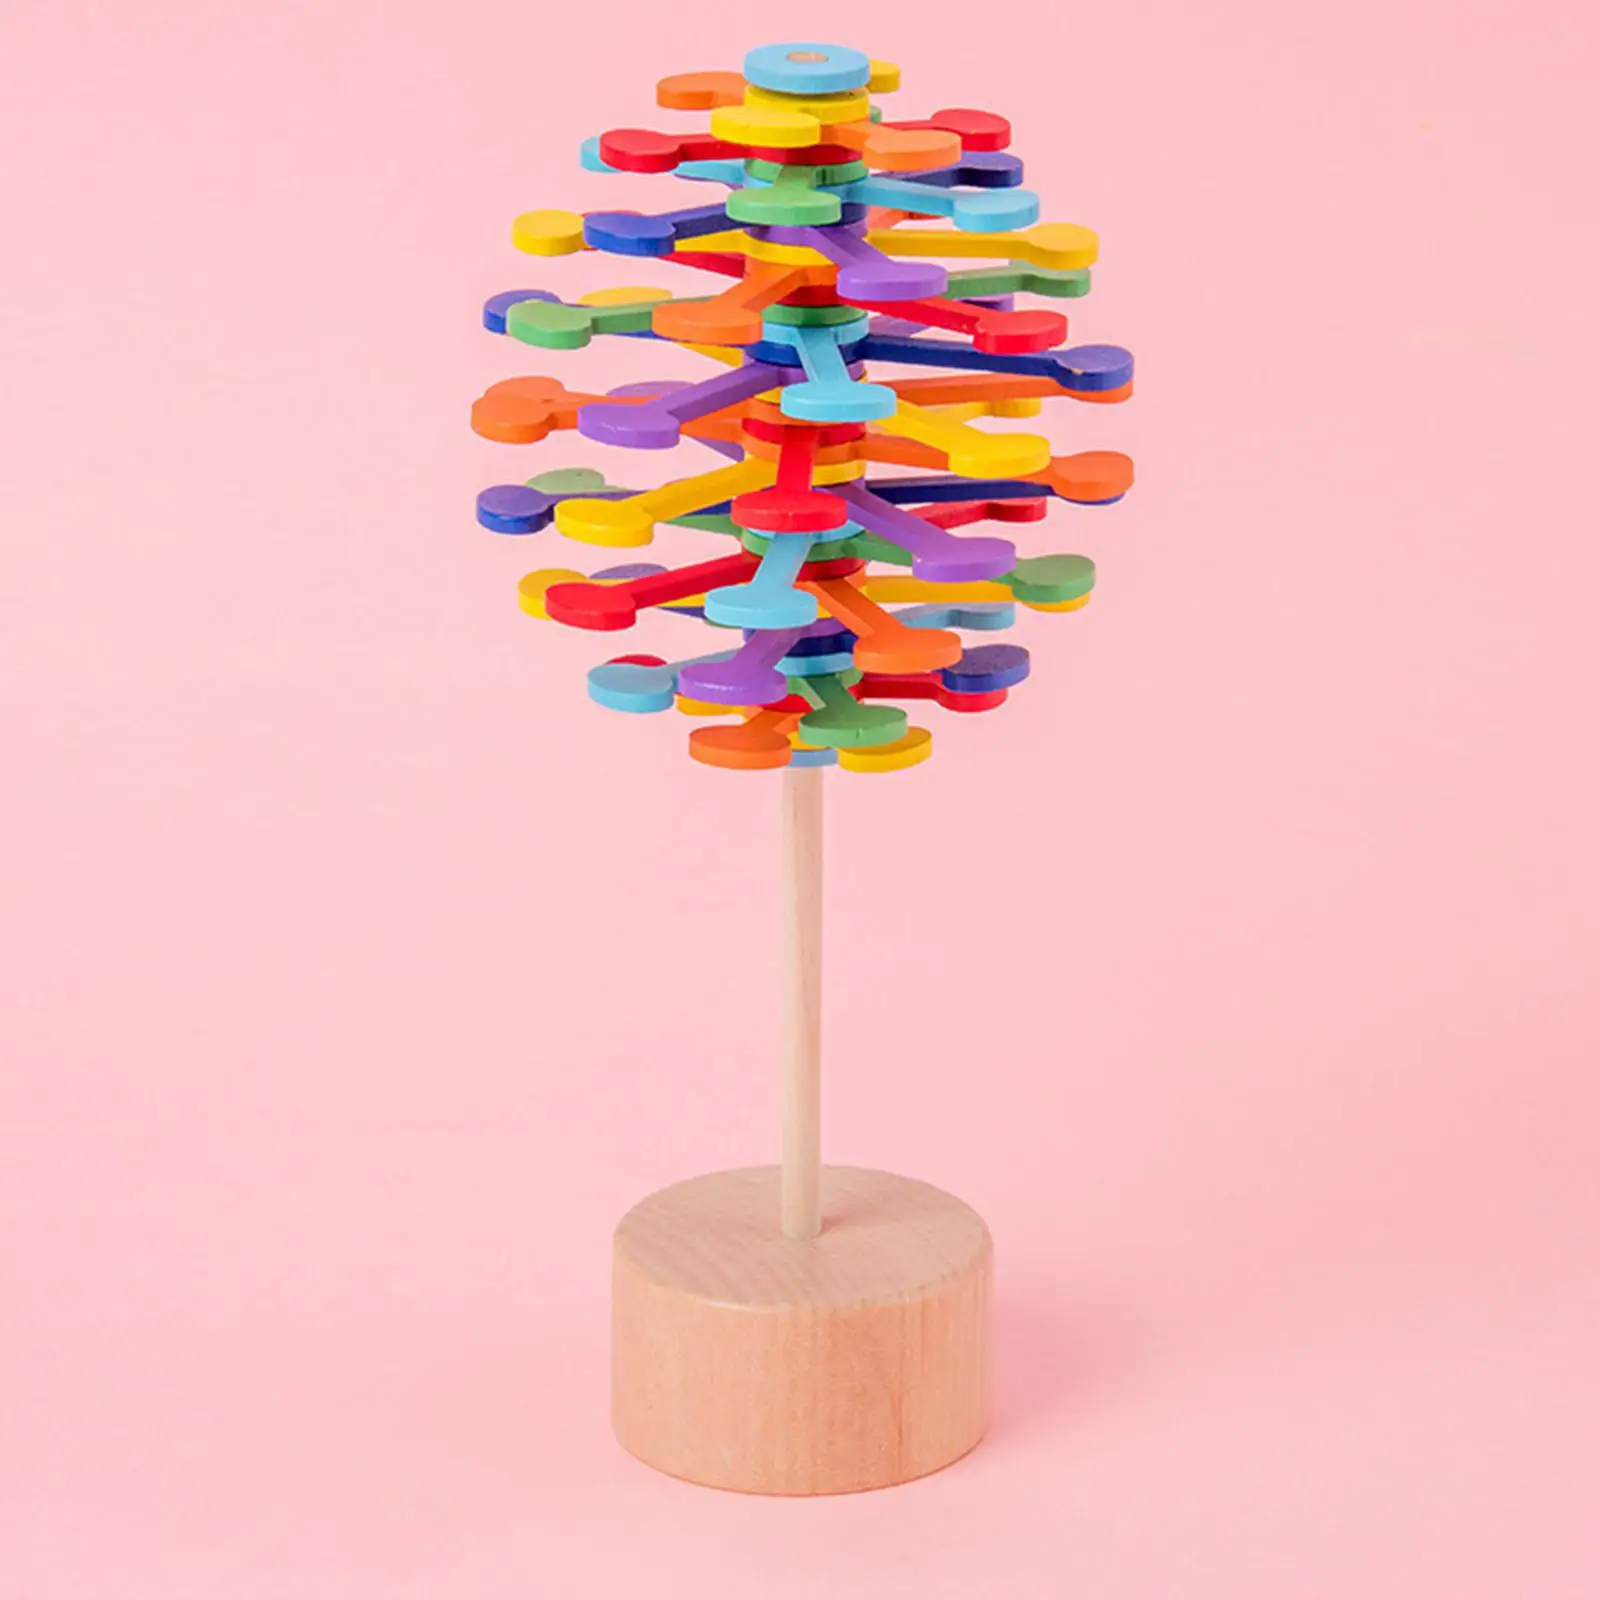 Novelty Wooden Rotary Spiral Lollipop Tricks Props Sensory Toys Multicolor Rotating Spiral Lollipop for Birthday Party Favors